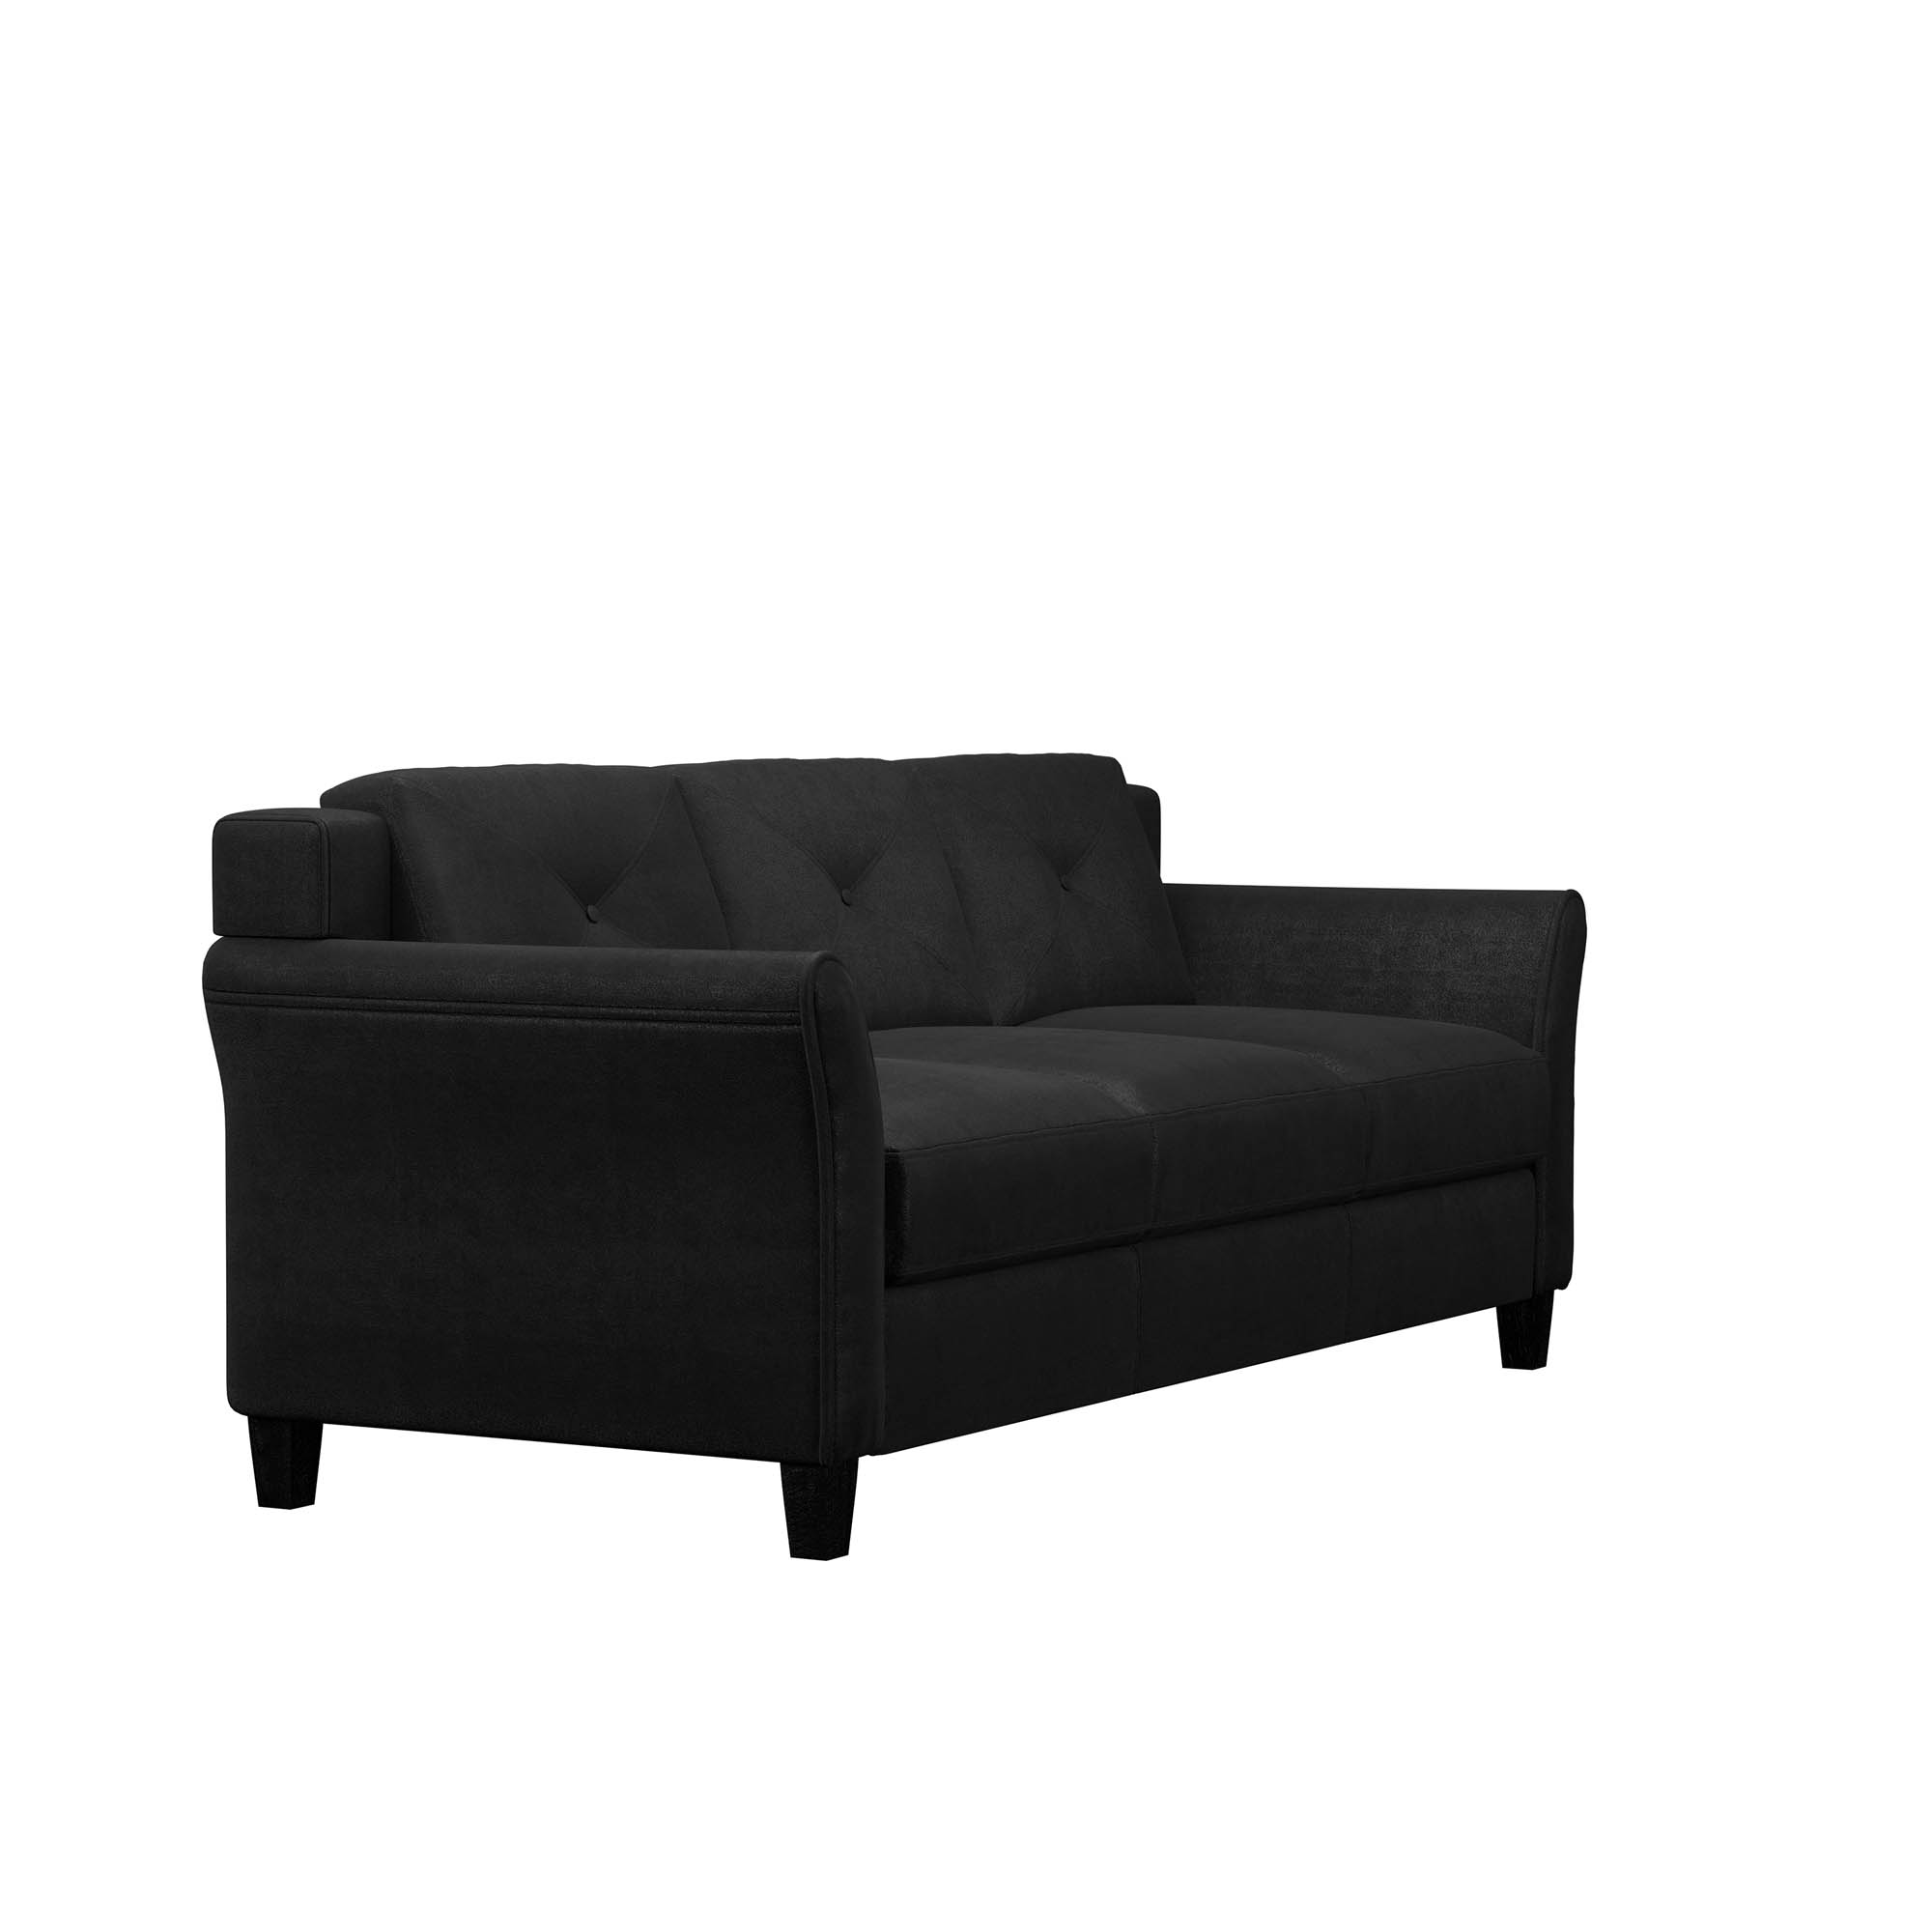 Lifestyle Solutions Taryn Curved Arms Sofa, Black Fabric - image 4 of 18